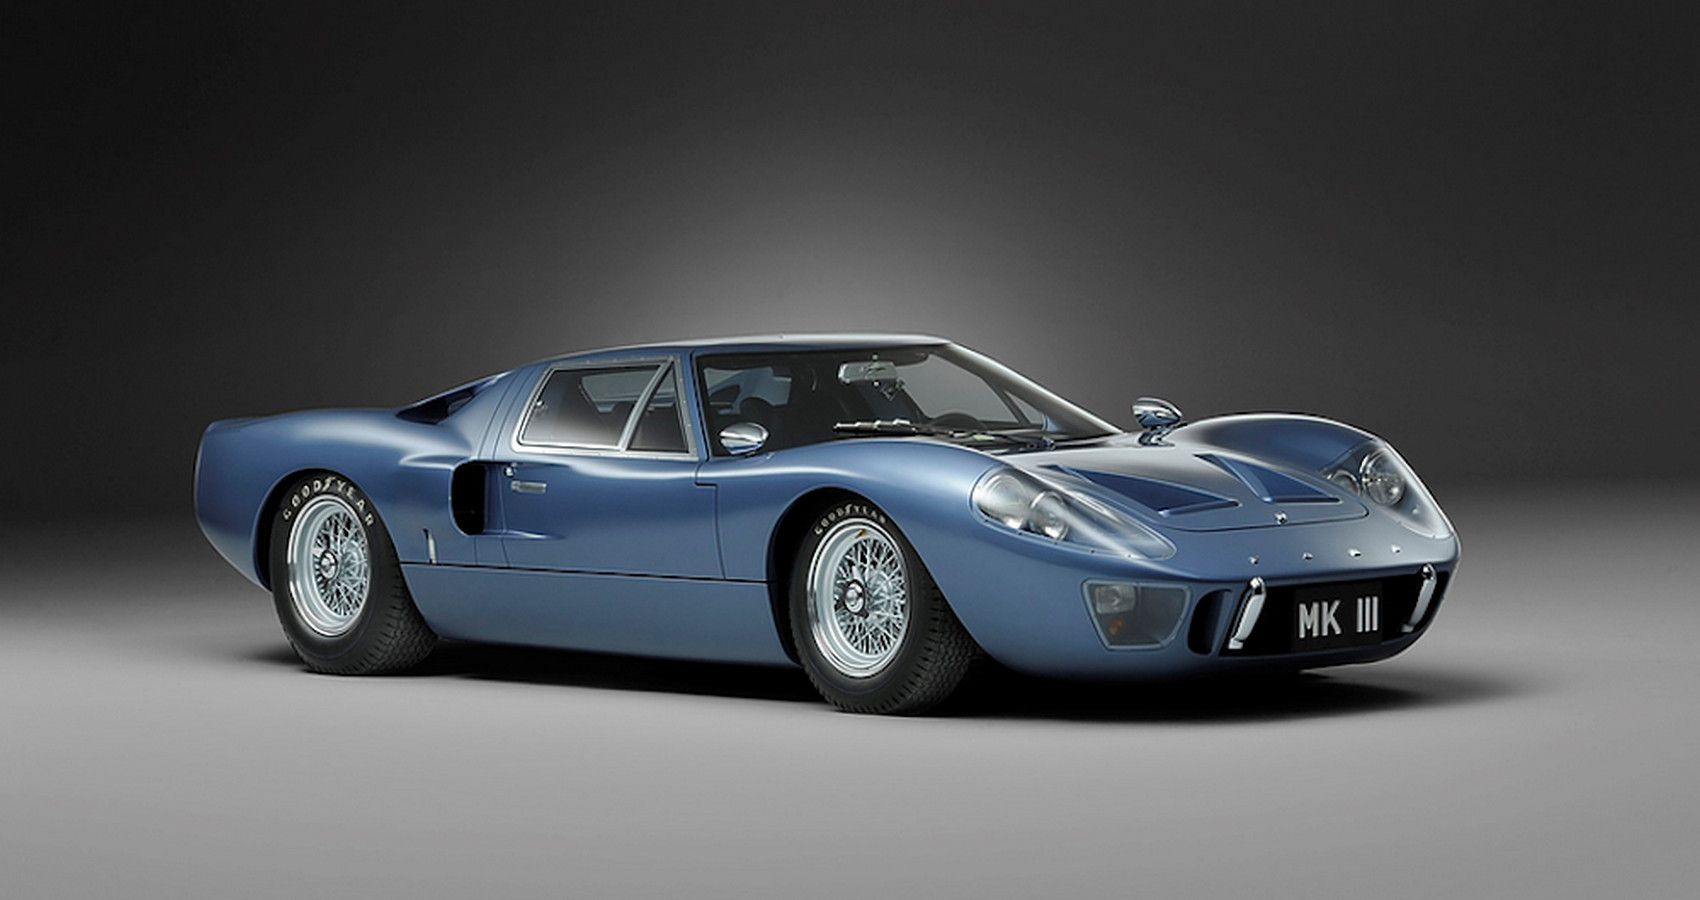 Front quarter view of a blue 1967 Ford GT40 Mk III